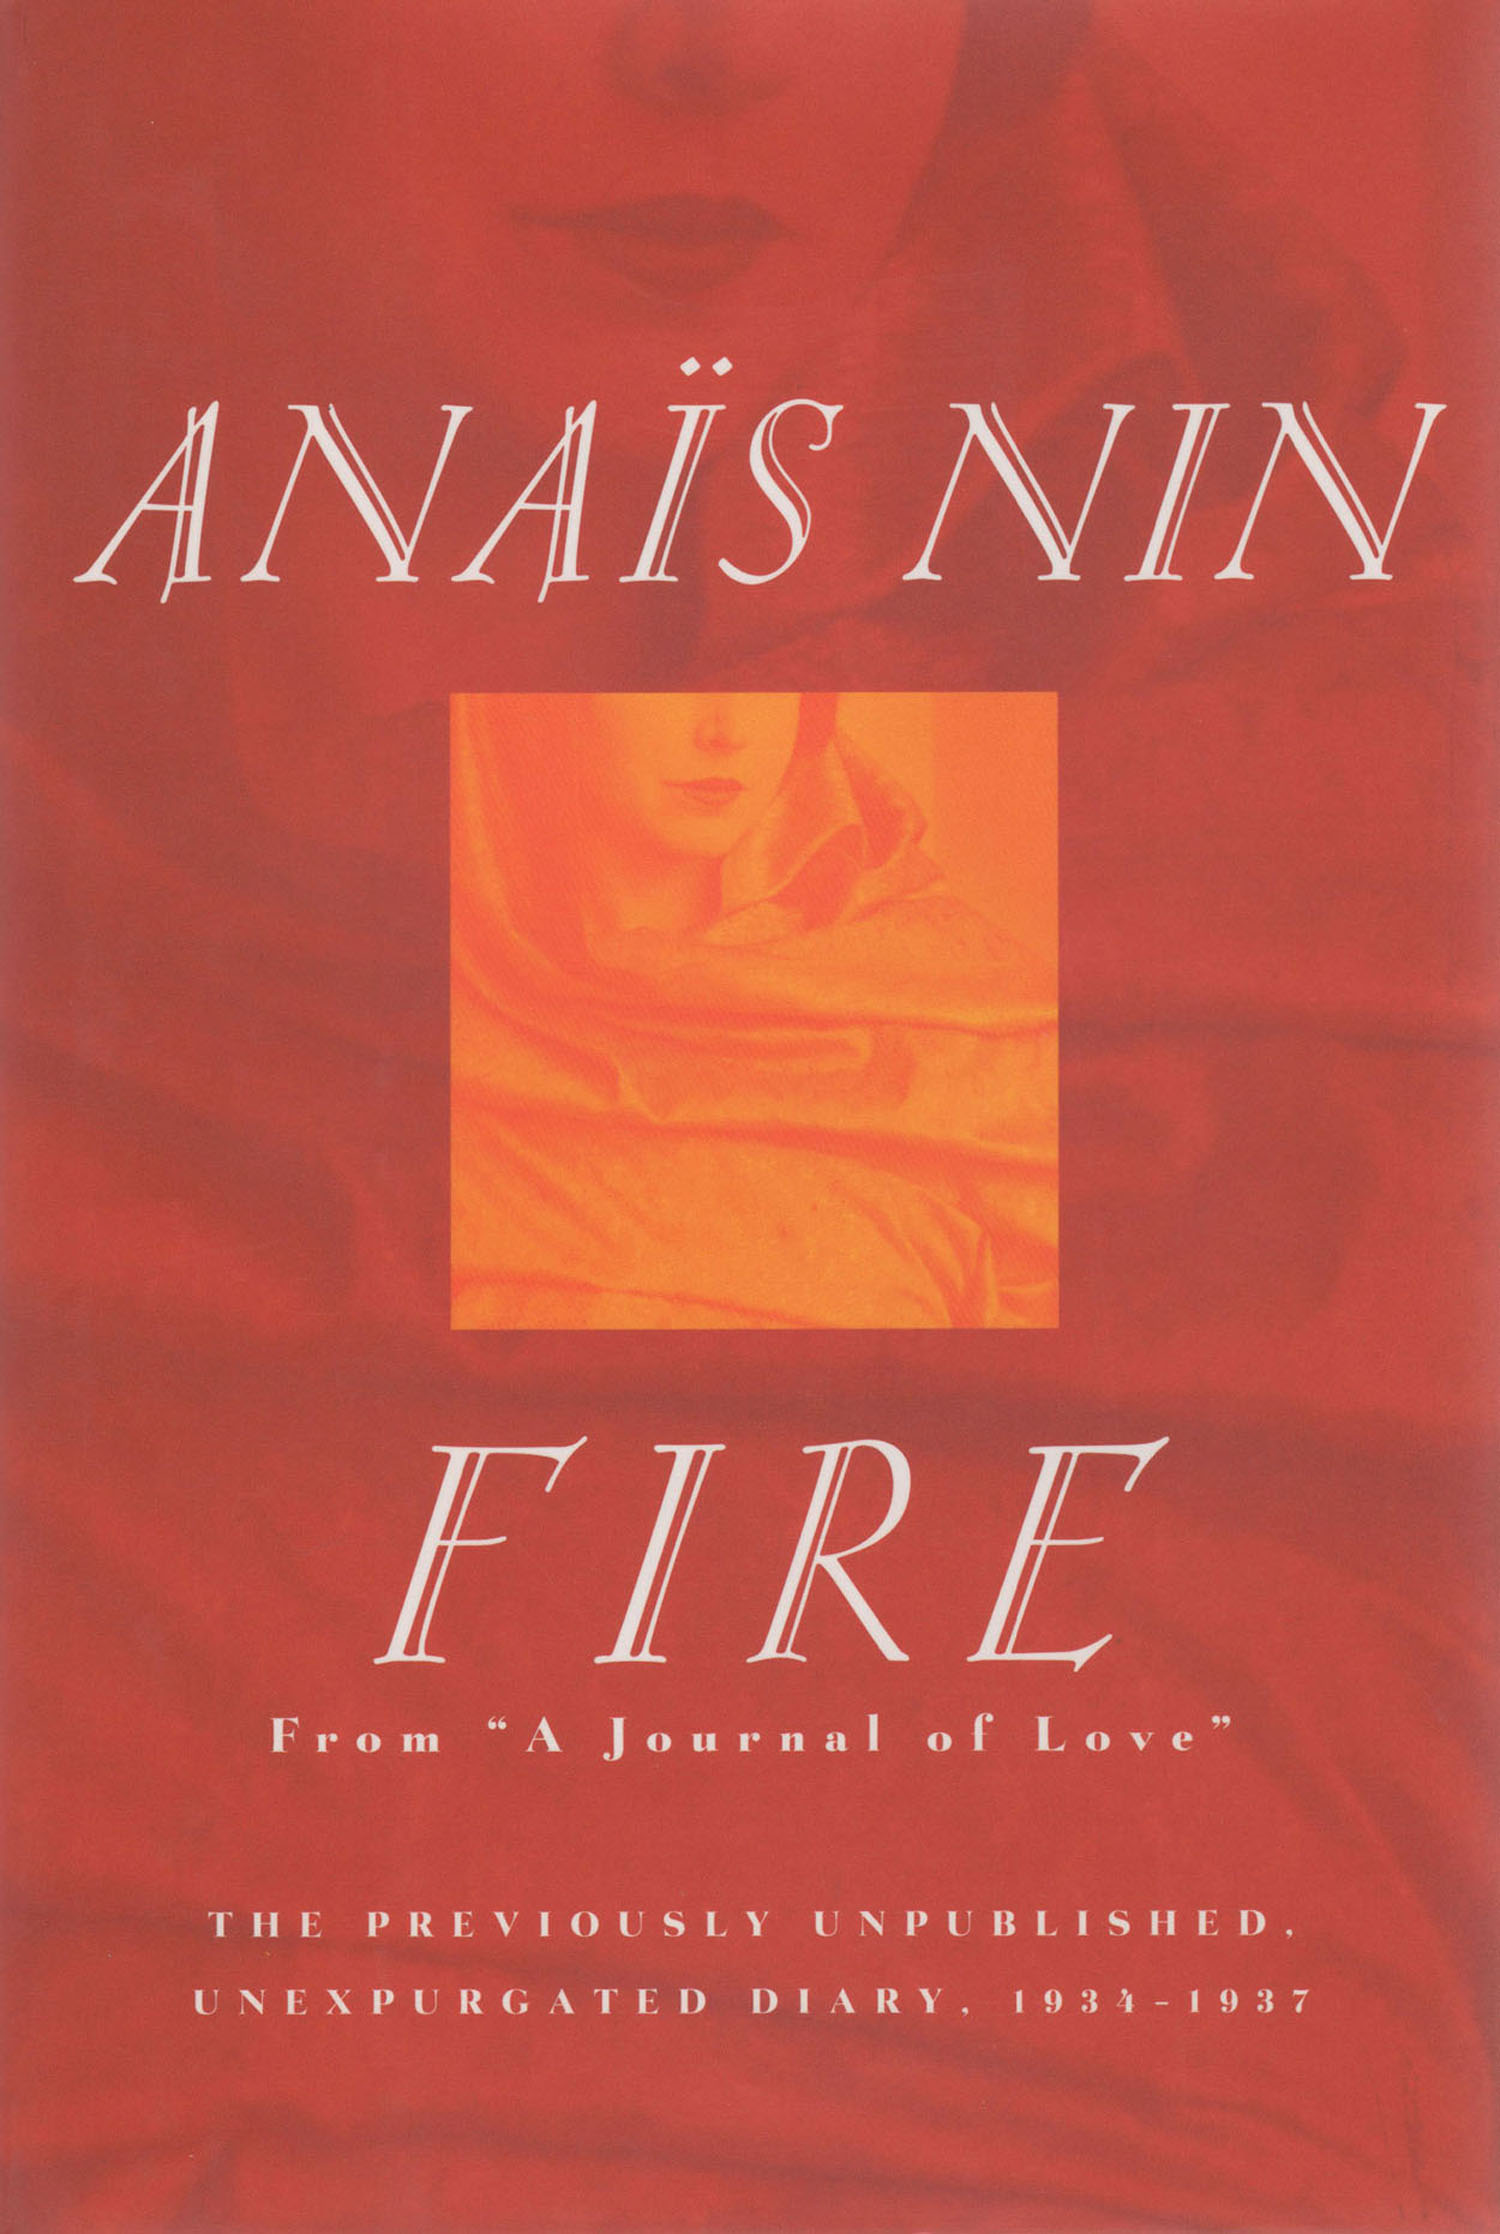 Fire: The Unexpurgated Diary of Anais Nin 1934-1937